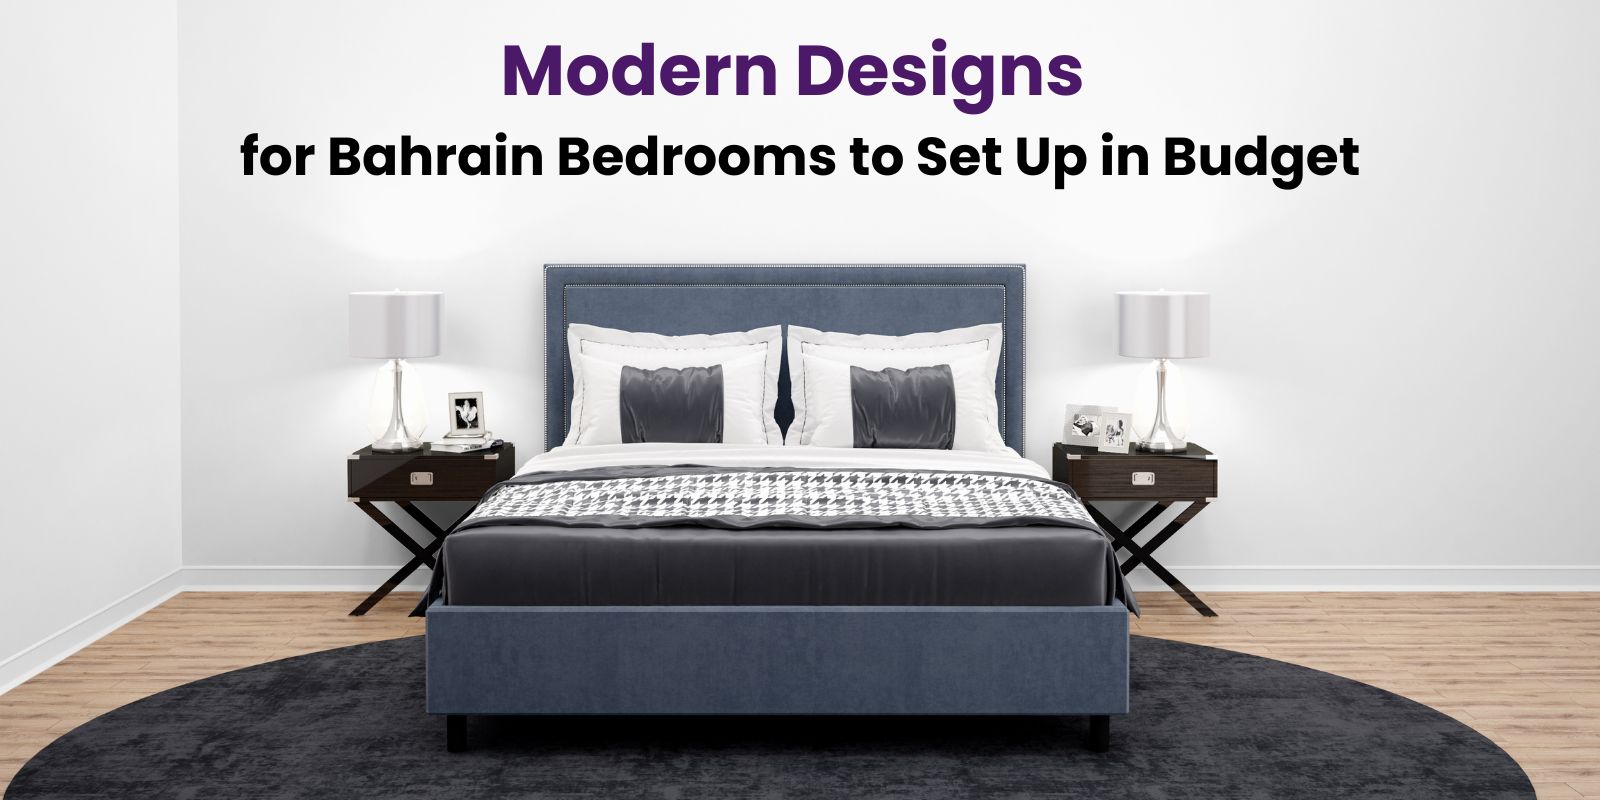 Modern Designs for Bahrain Bedrooms to Set Up in Budget